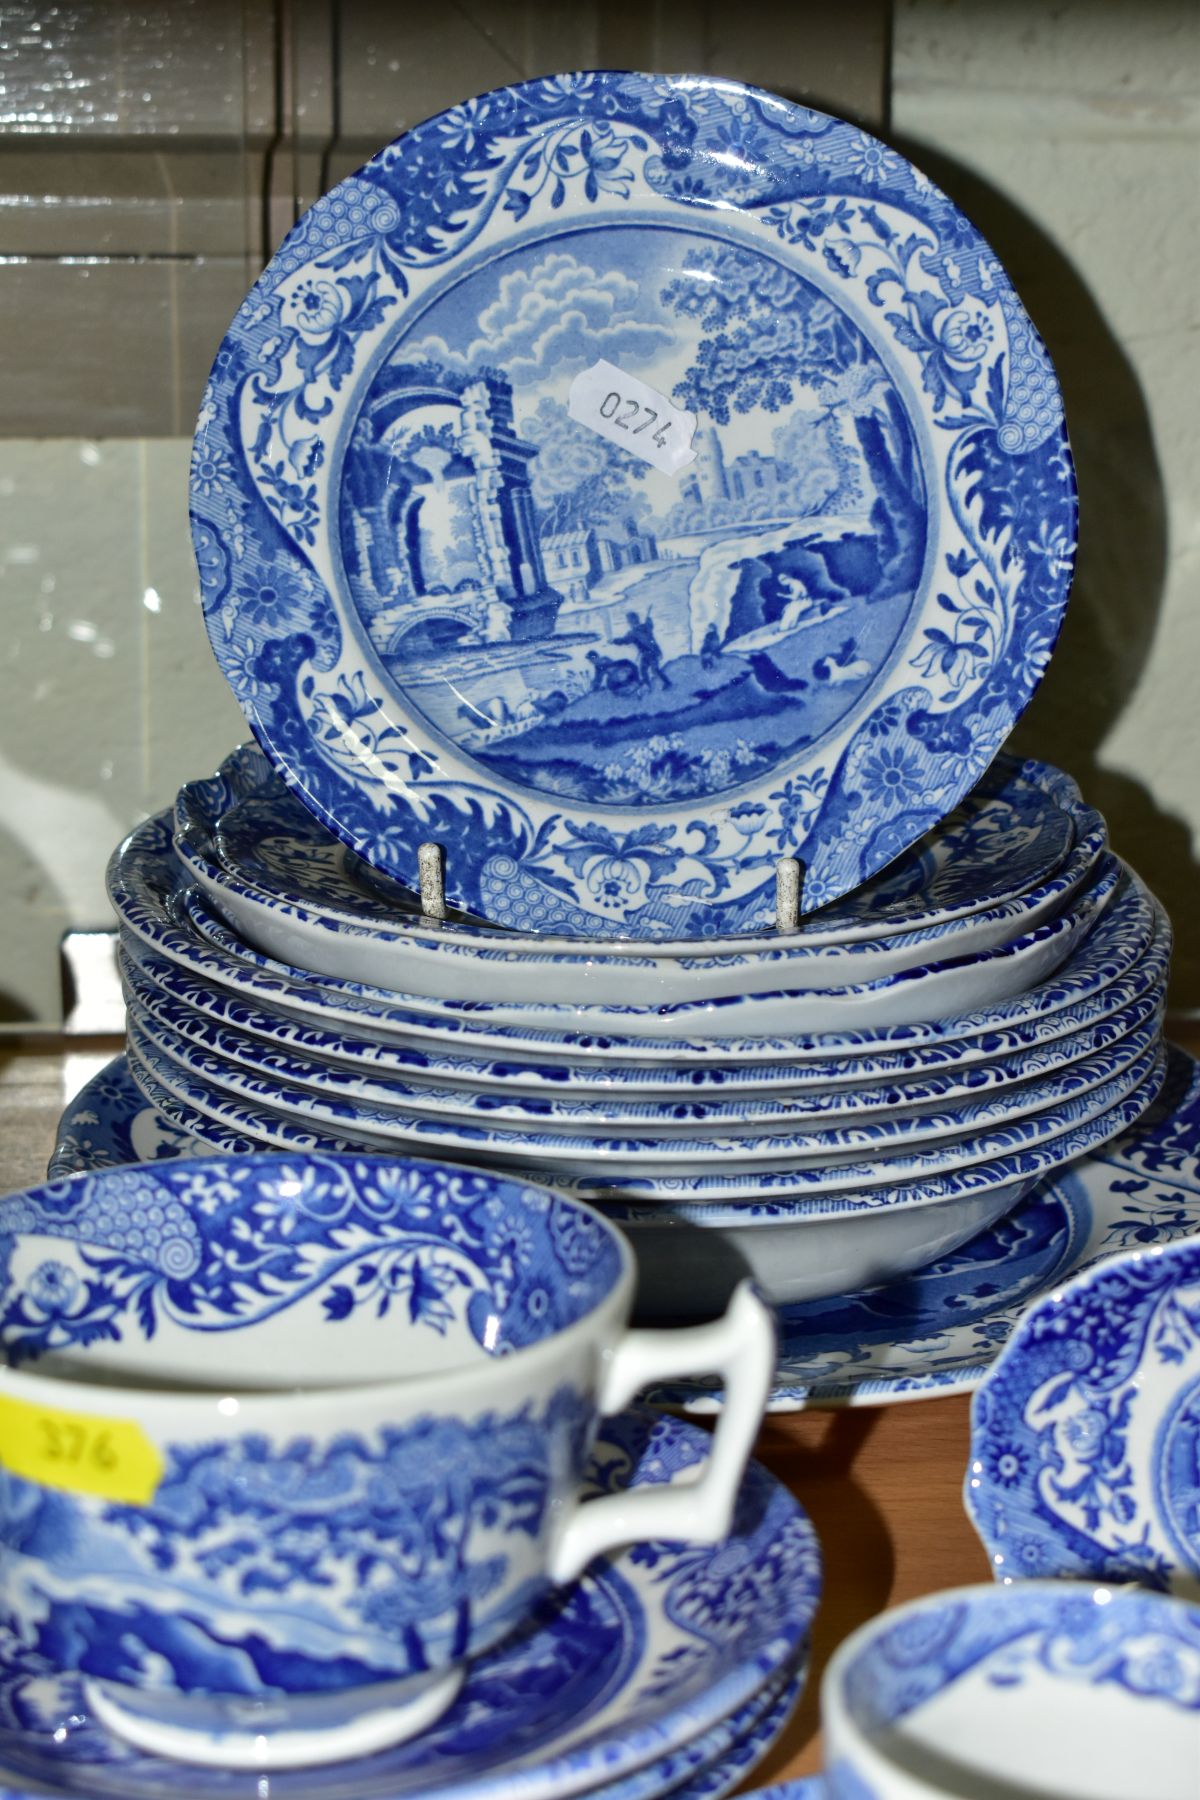 A QUANTITY OF MODERN SPODE ITALIAN SPODE DESIGN DINNER WARES, comprising an 11cm high jug, two small - Image 6 of 10